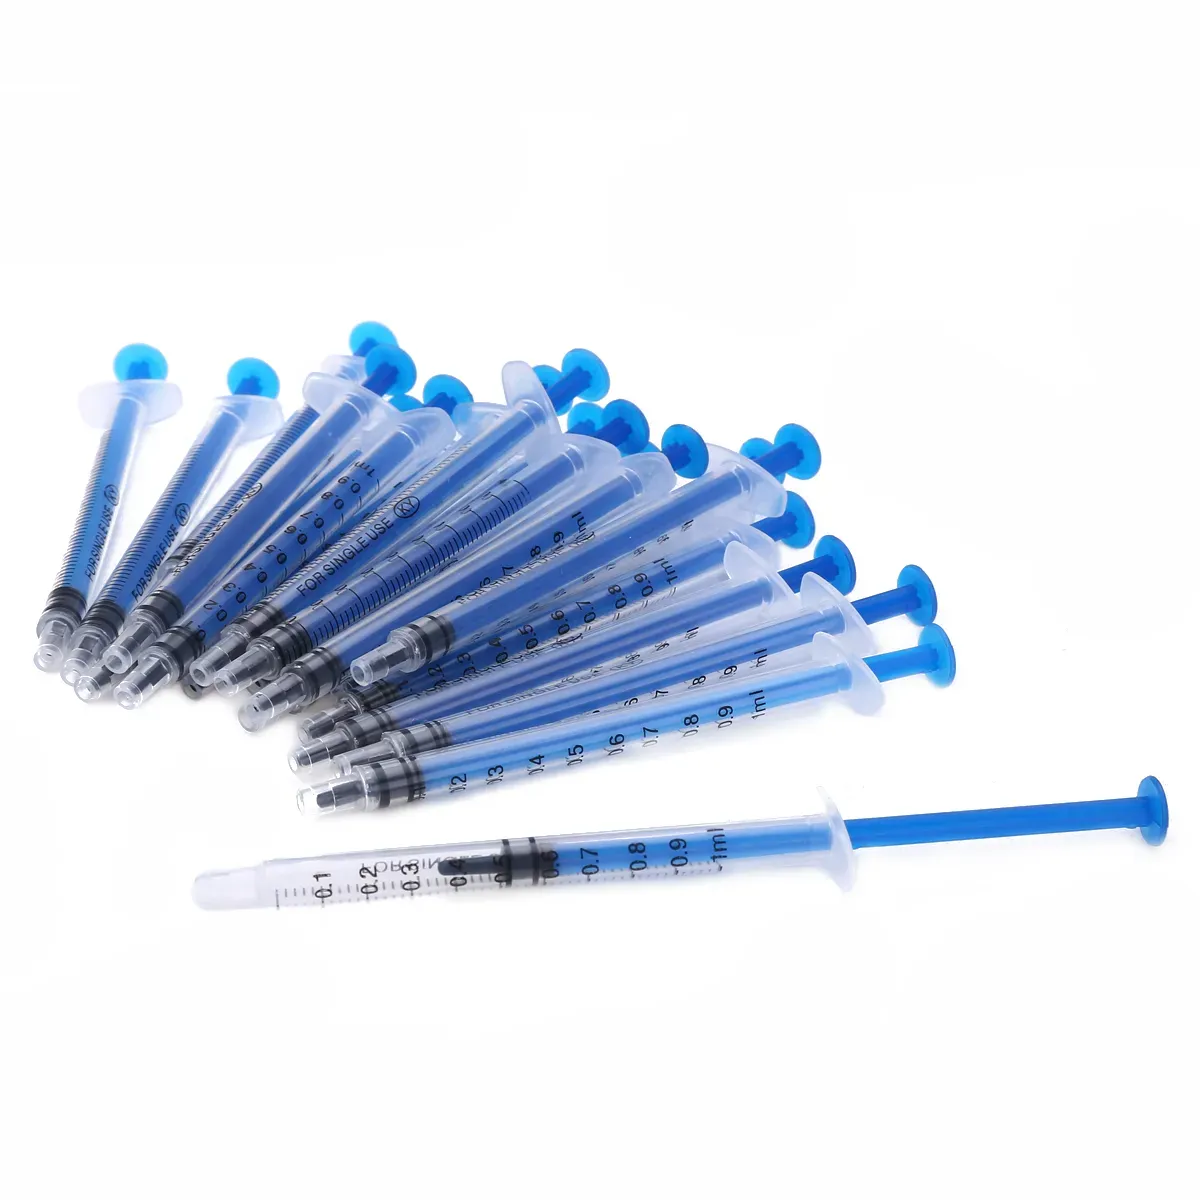 / Lab Supplies 1ml Plastic Disposable Injector Syringe For Refilling Measuring Nutrient Tools Feeding , Mixing Liquids No Needles